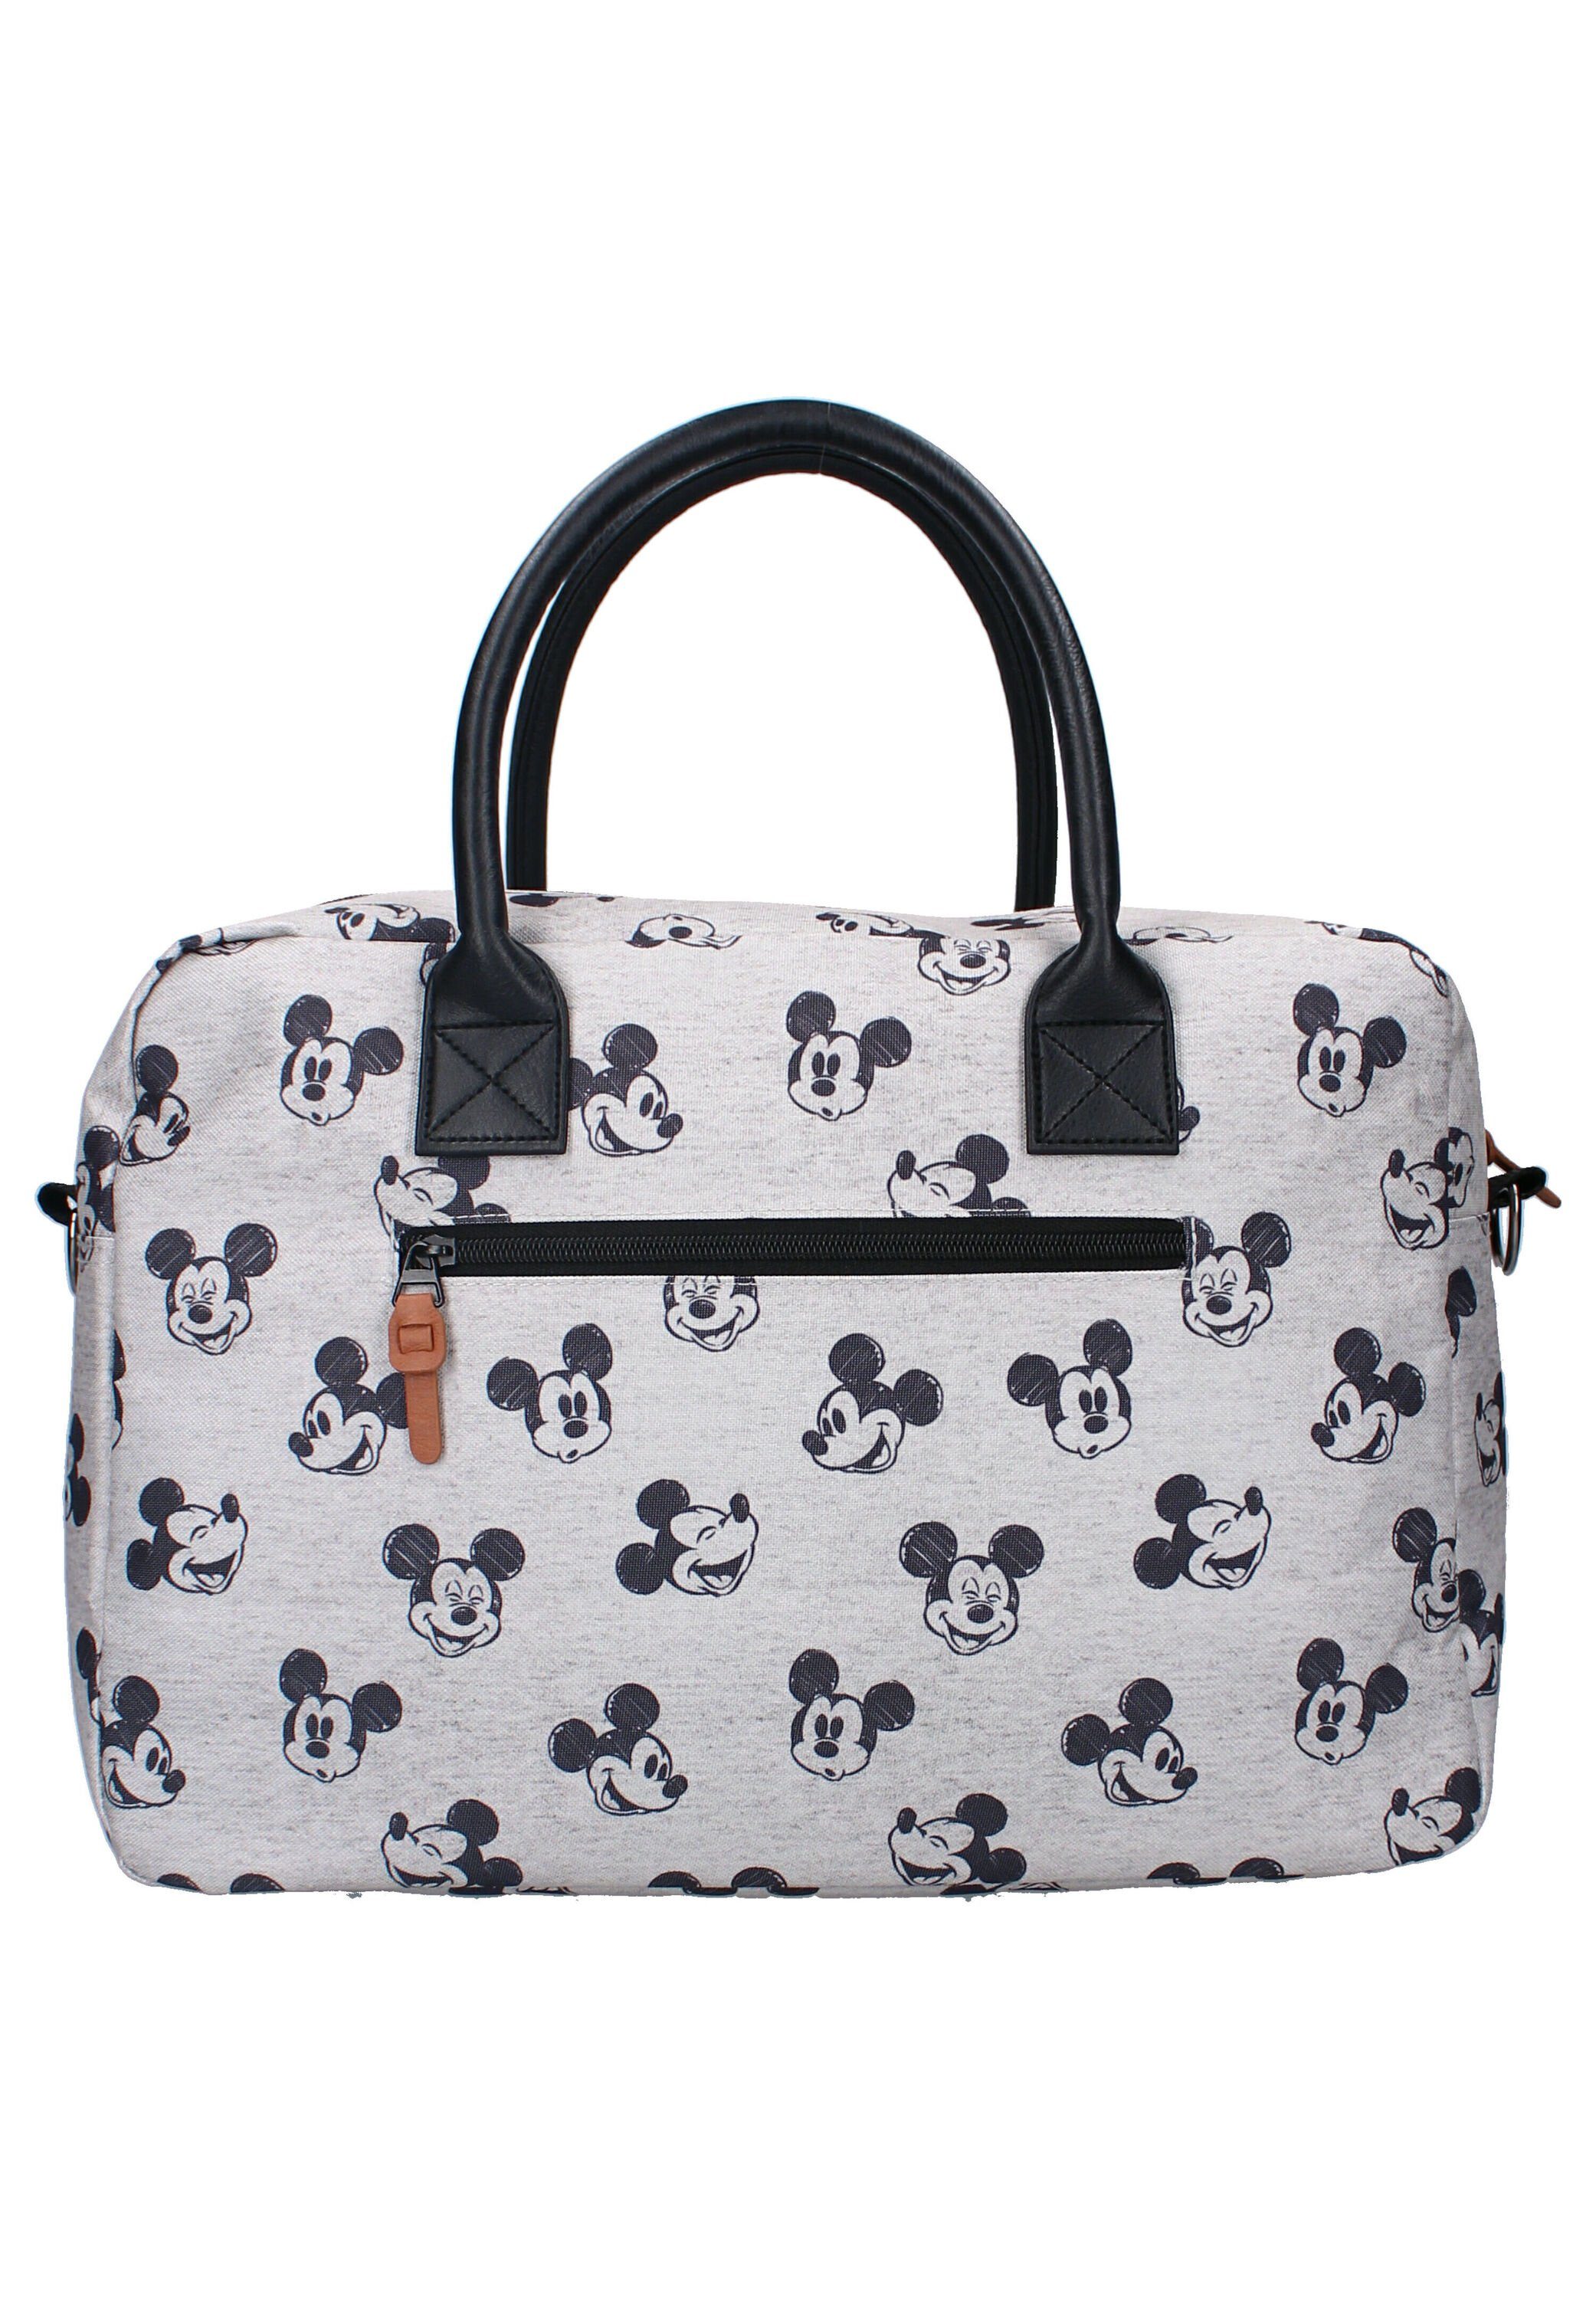 Vadobag Better Mouse Mickey Wickeltasche care